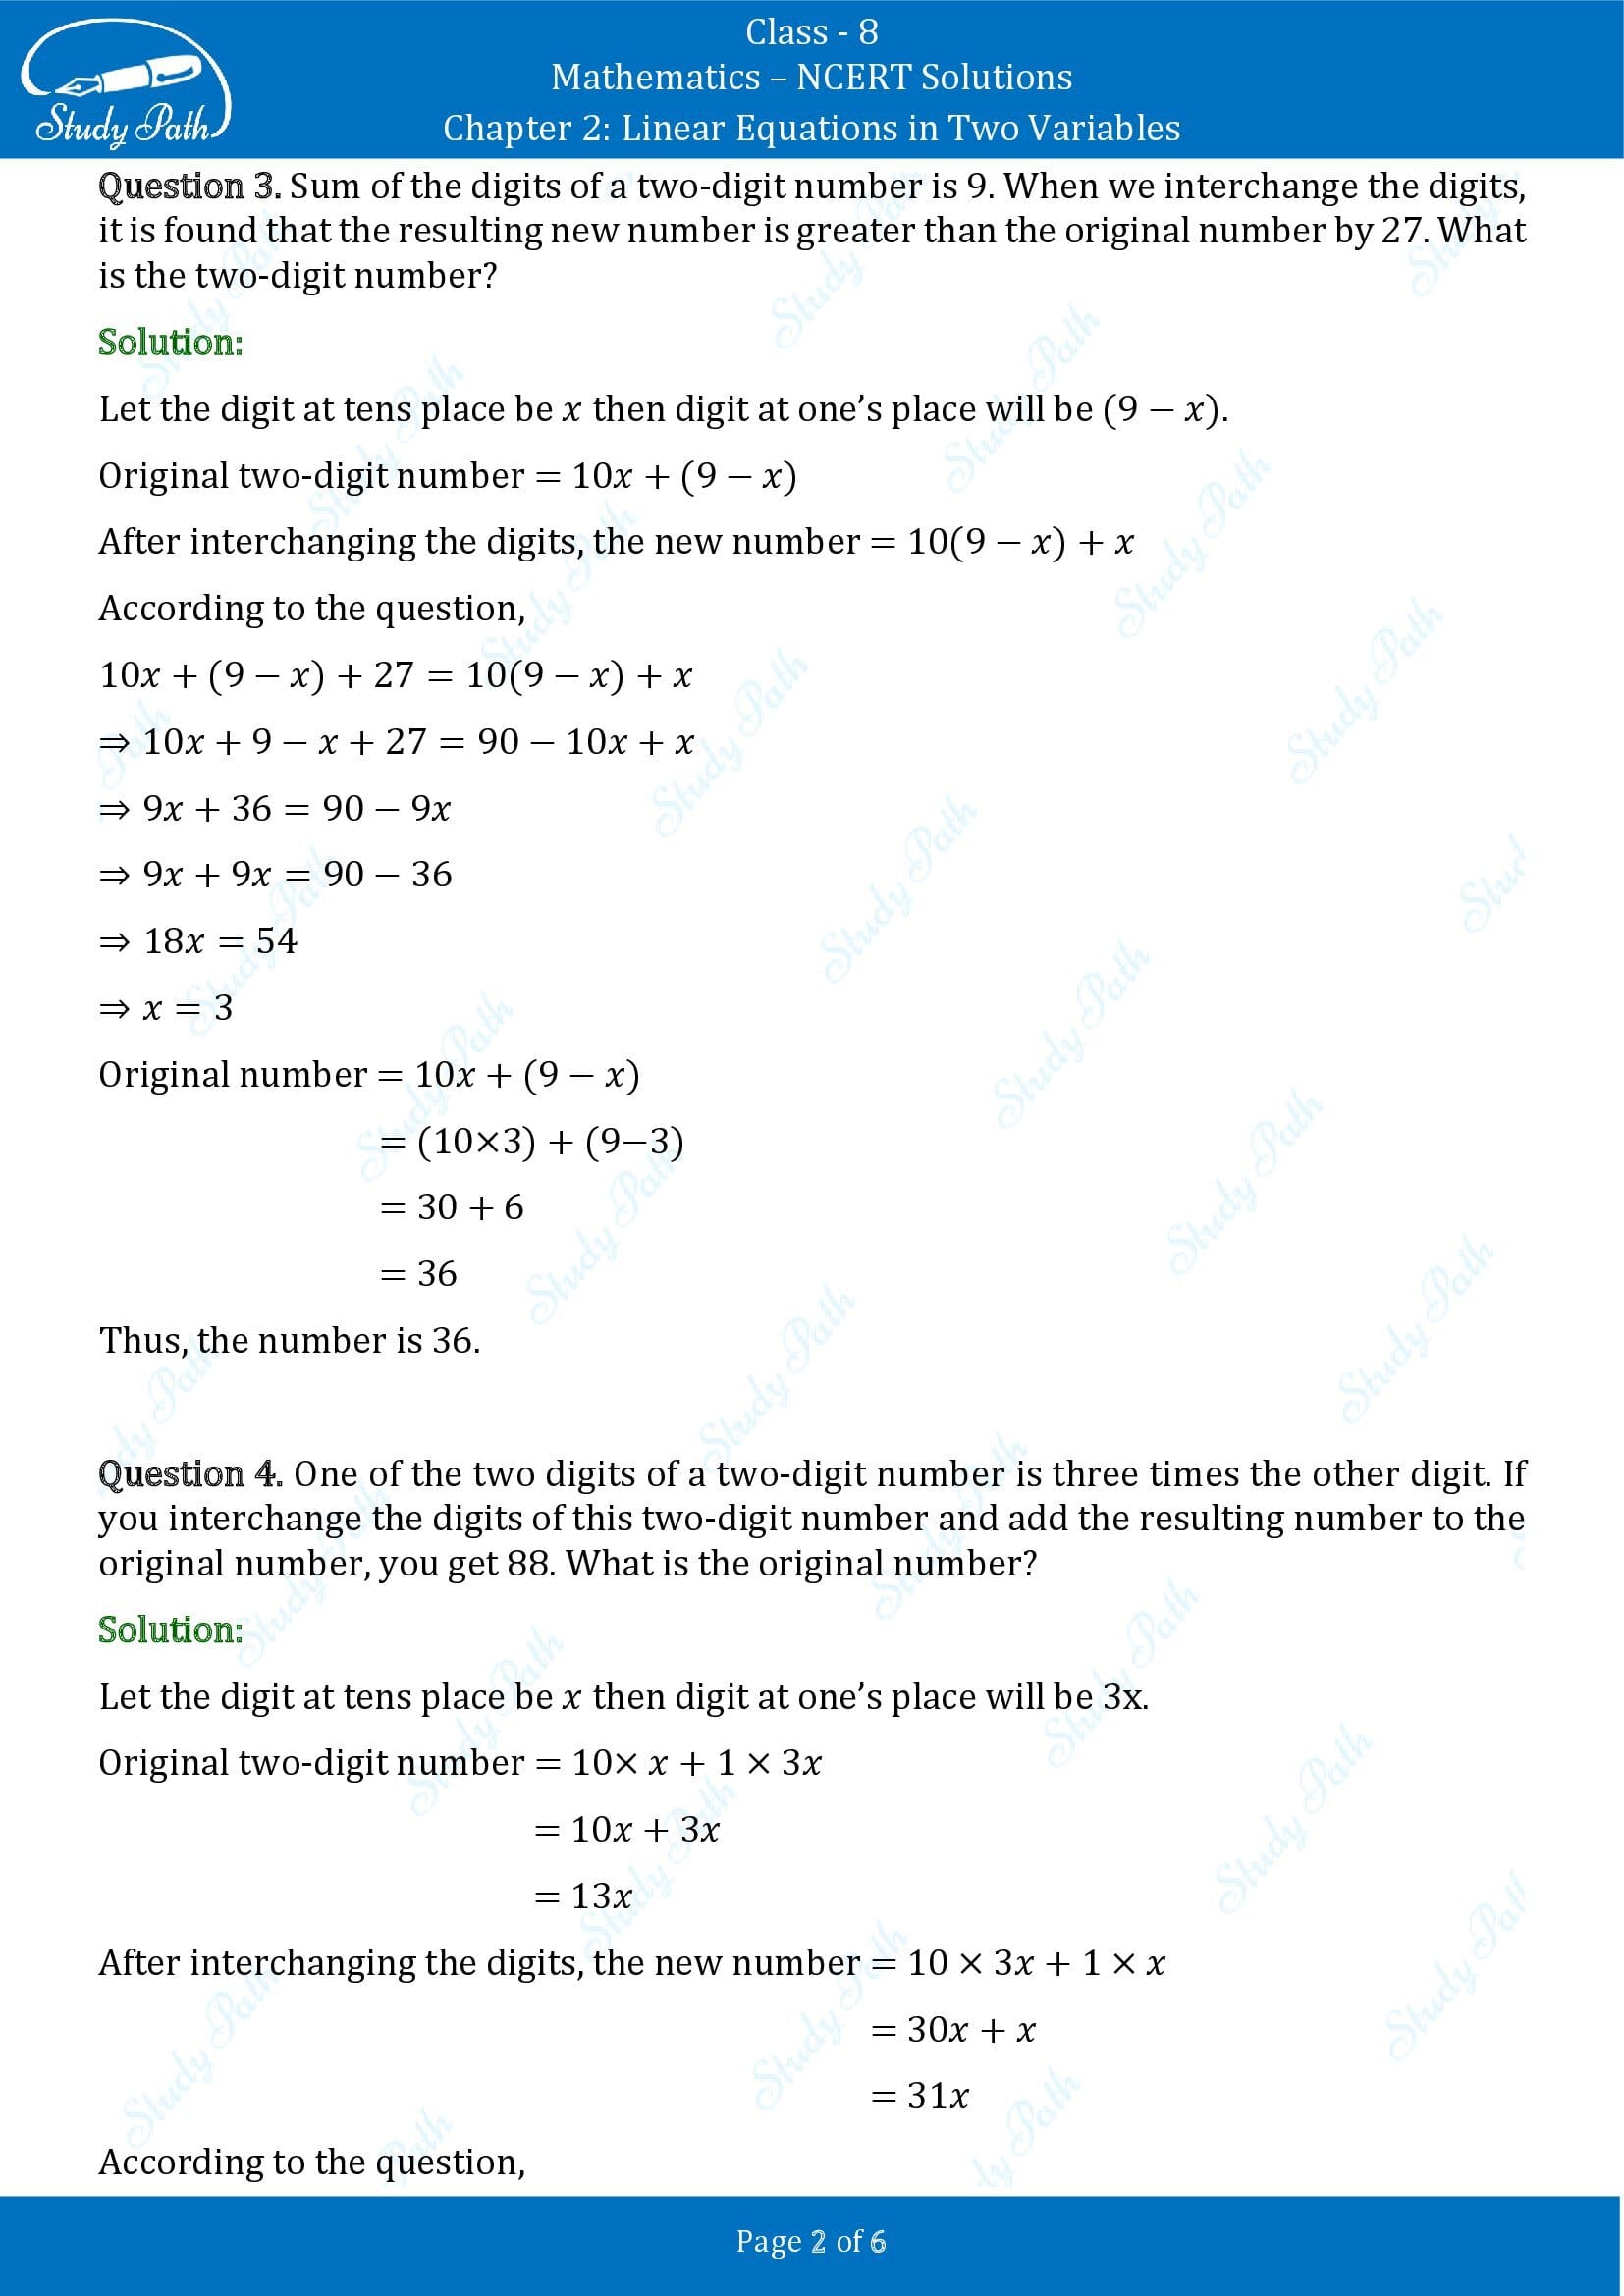 NCERT Solutions for Class 8 Maths Chapter 2 Linear Equations in Two Variables Exercise 2.4 00002